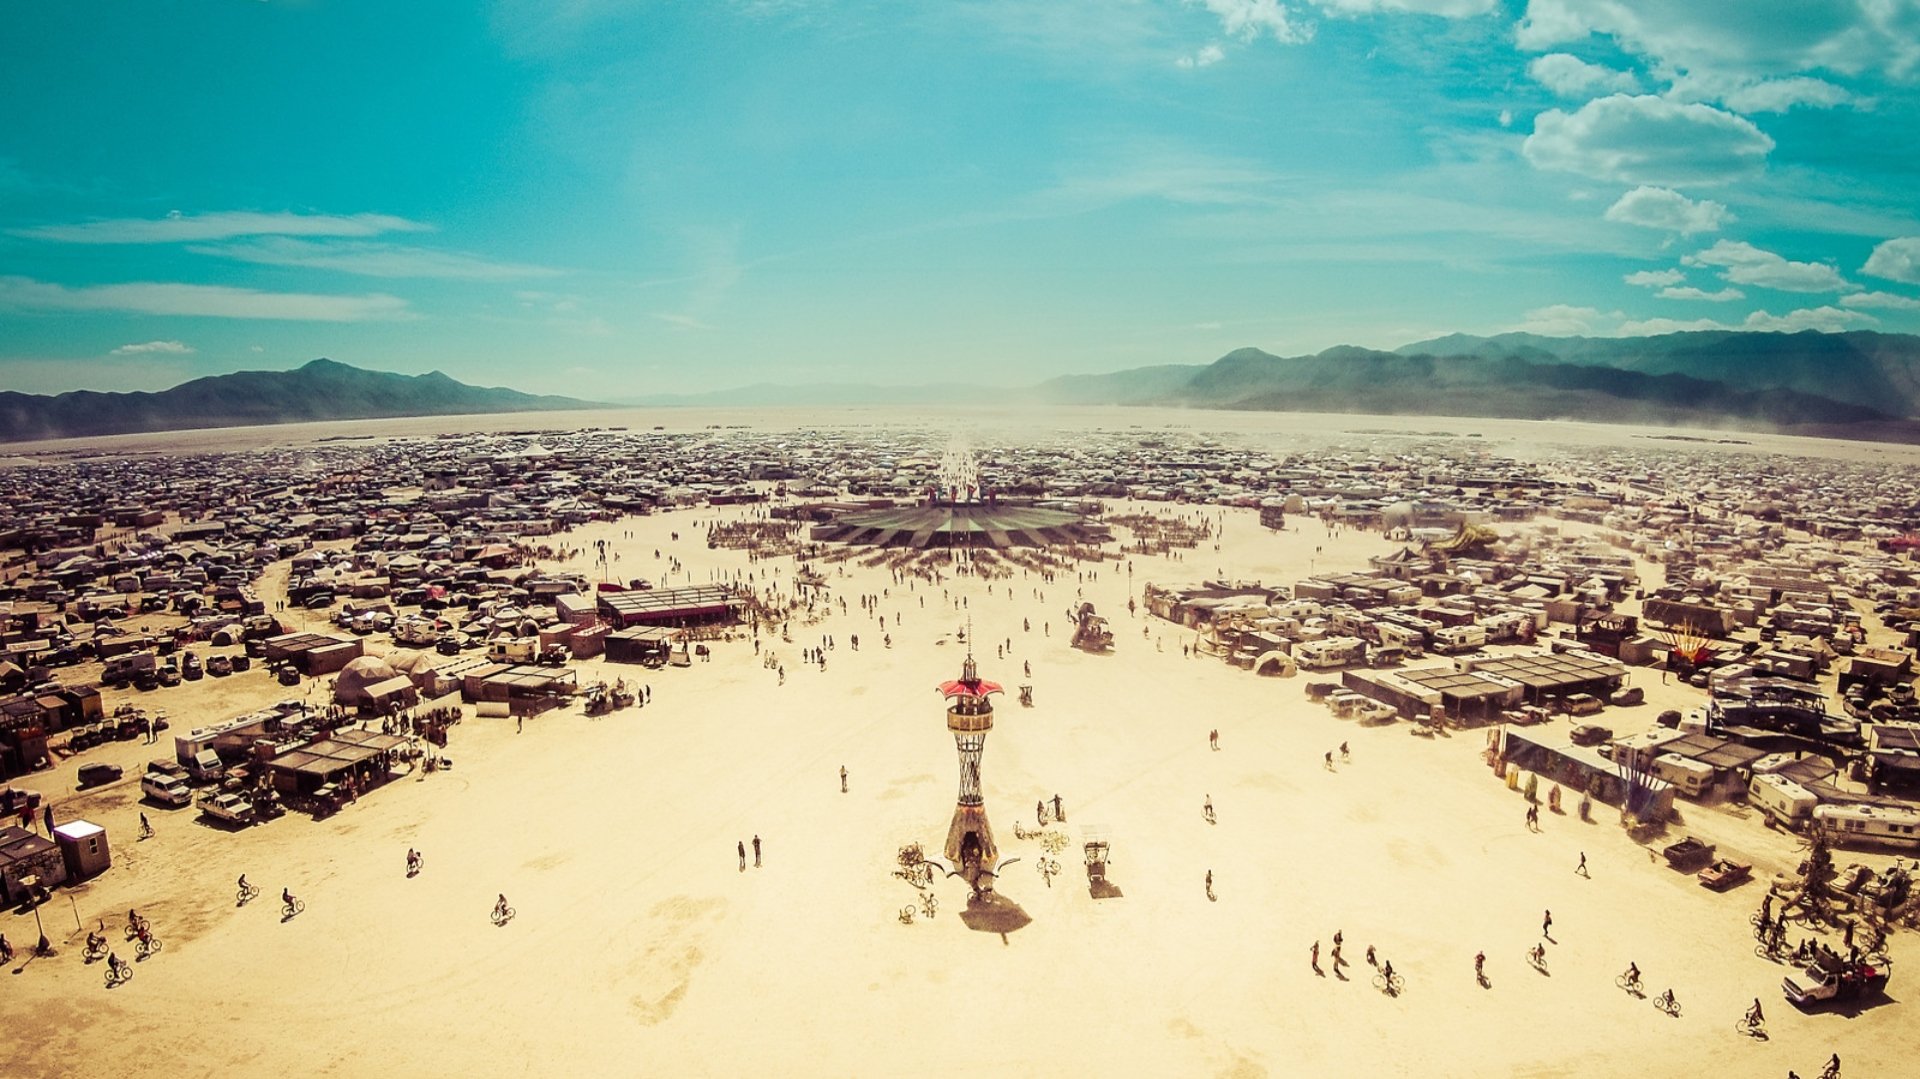 Boundless Space, the possibilities of Burning Man